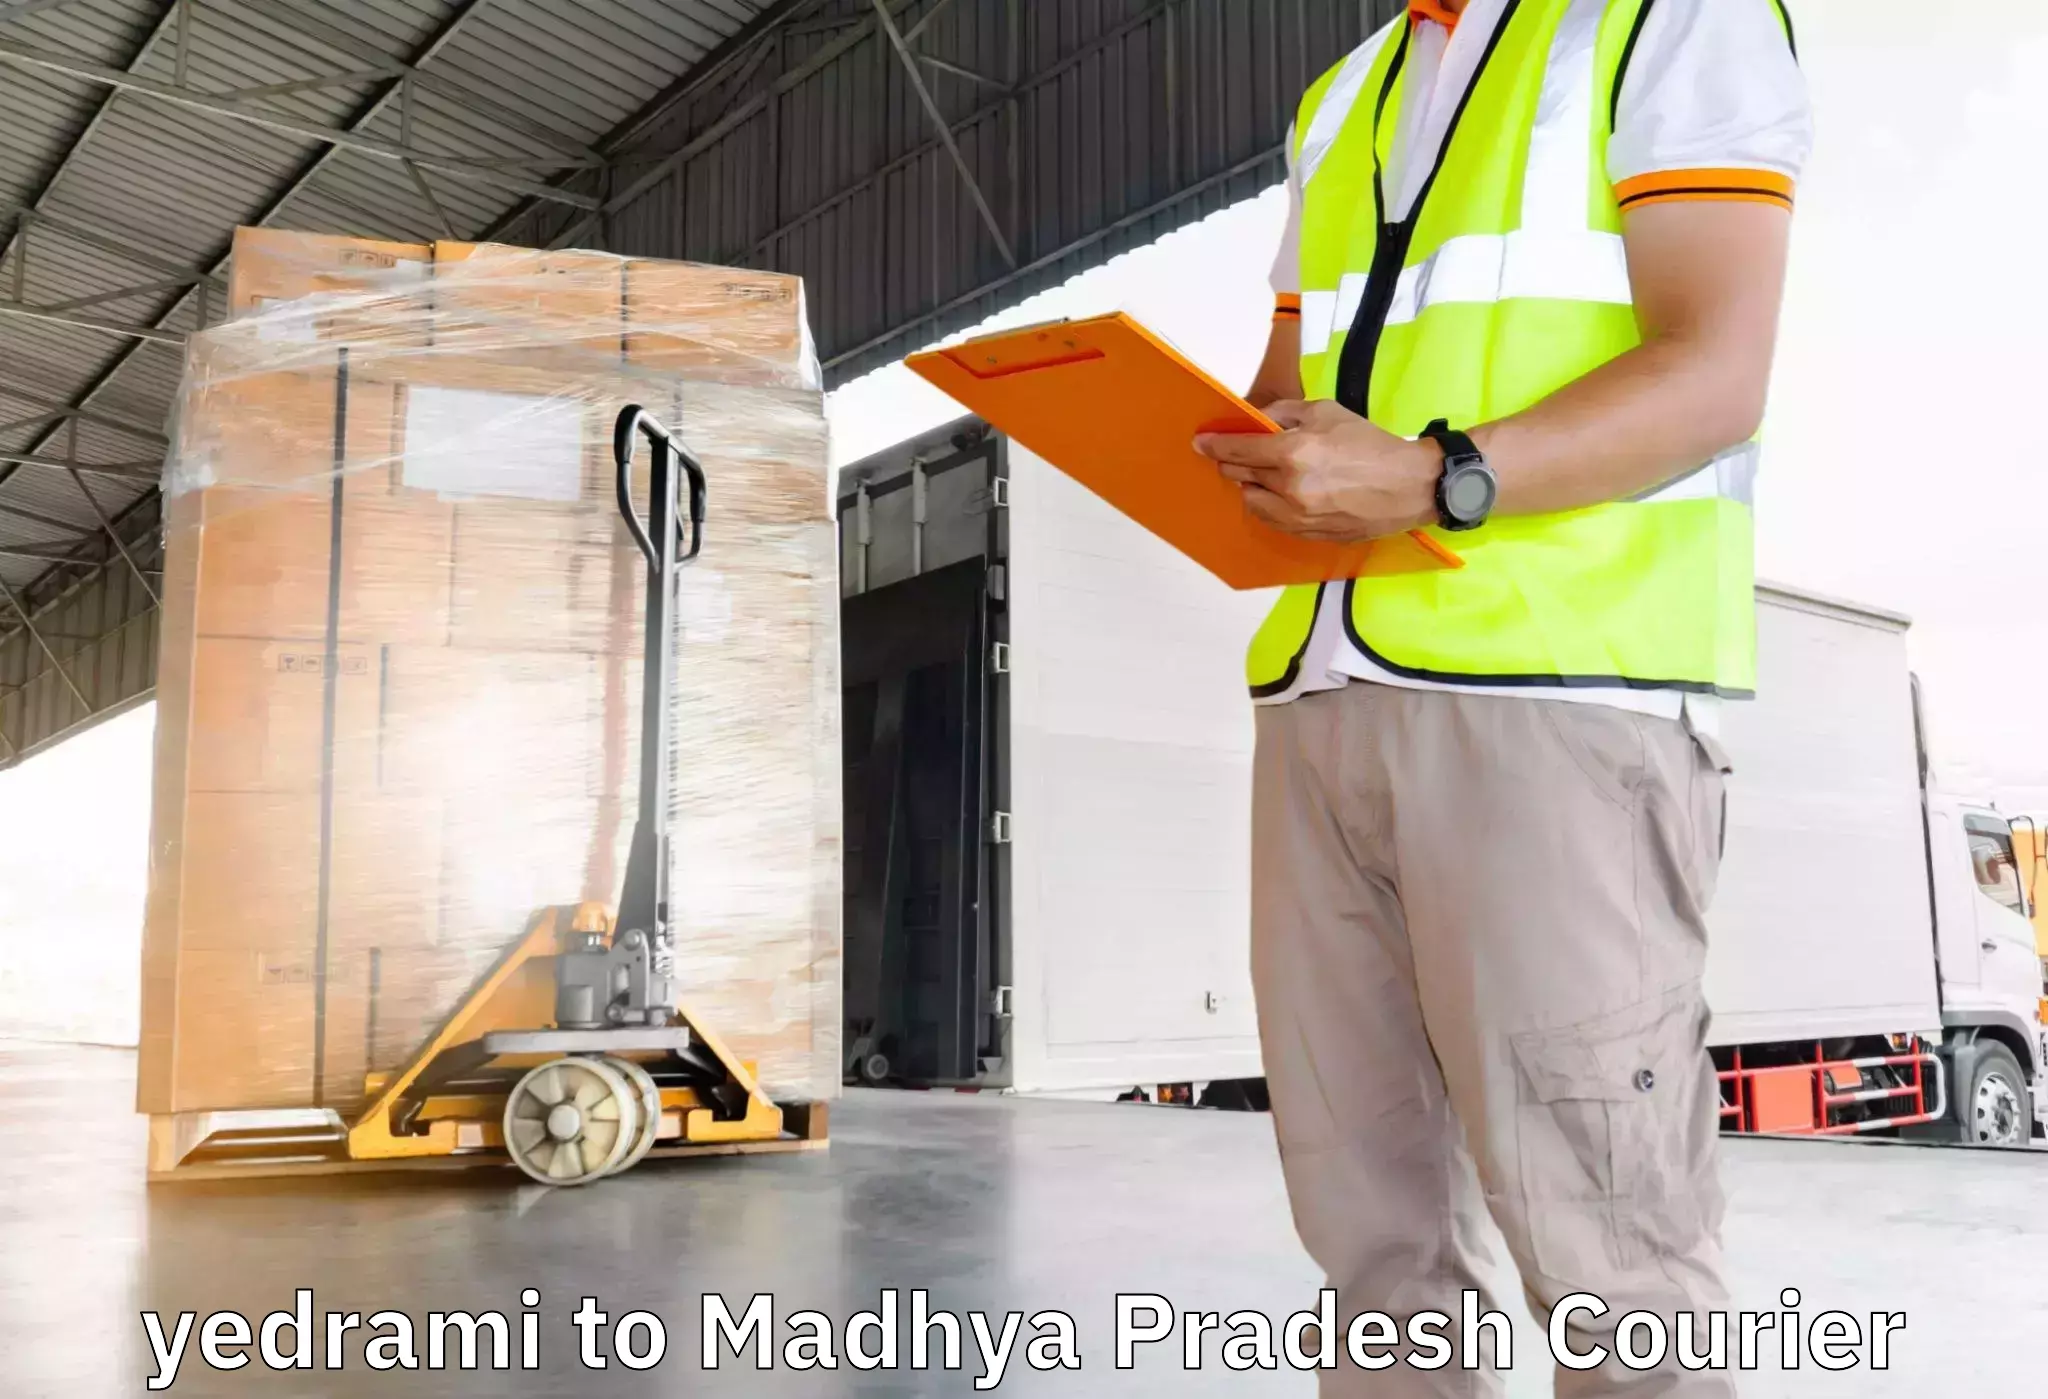 Moving and handling services yedrami to Sleemanabad